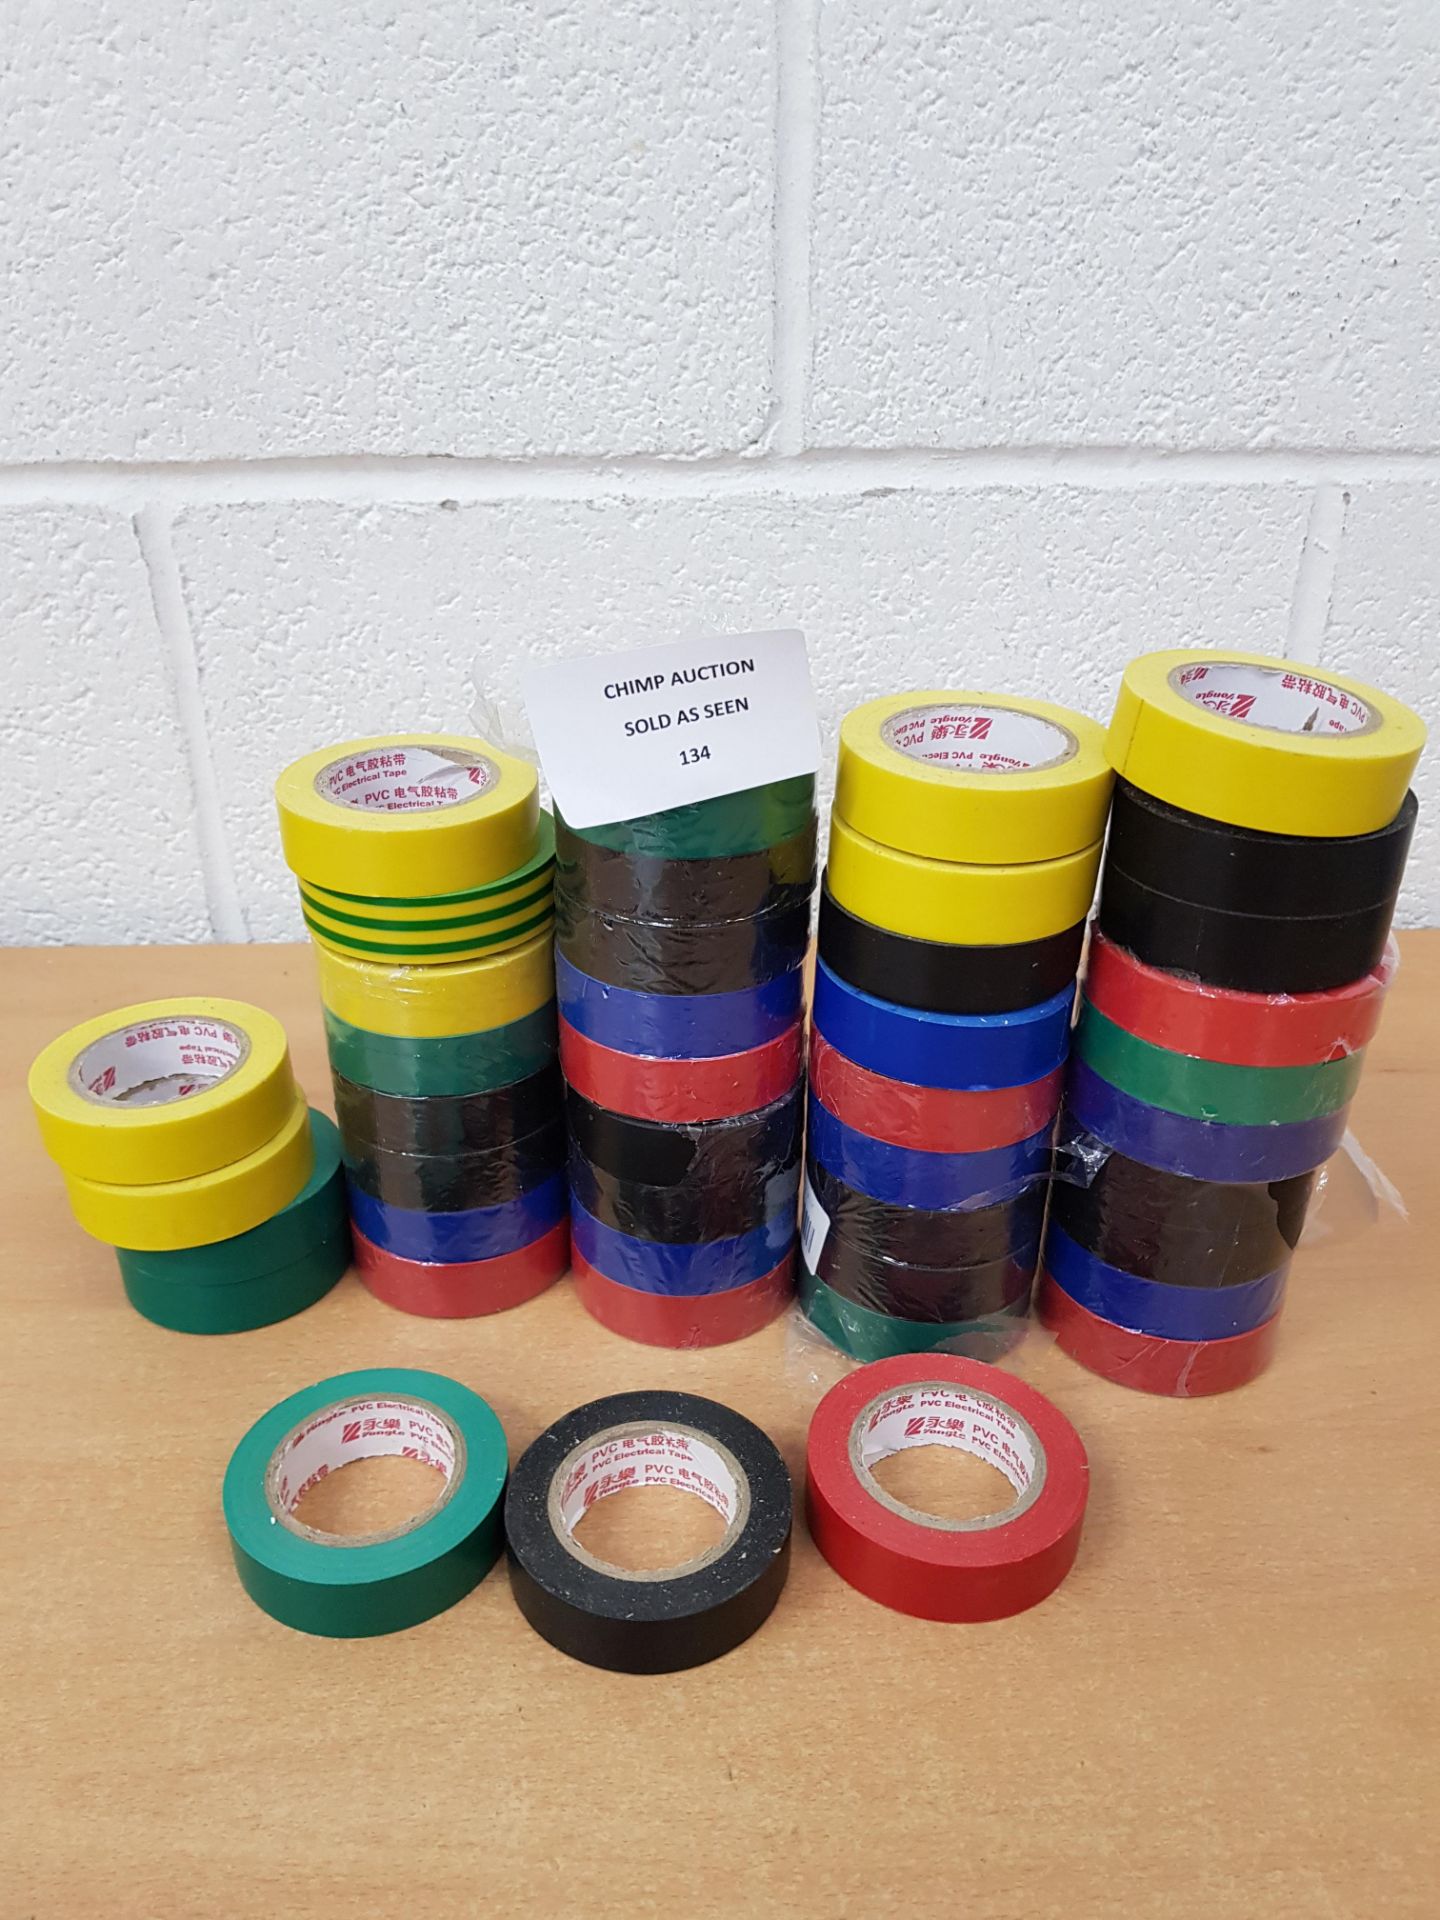 Joblot of mixed Electrical Insulation tapes